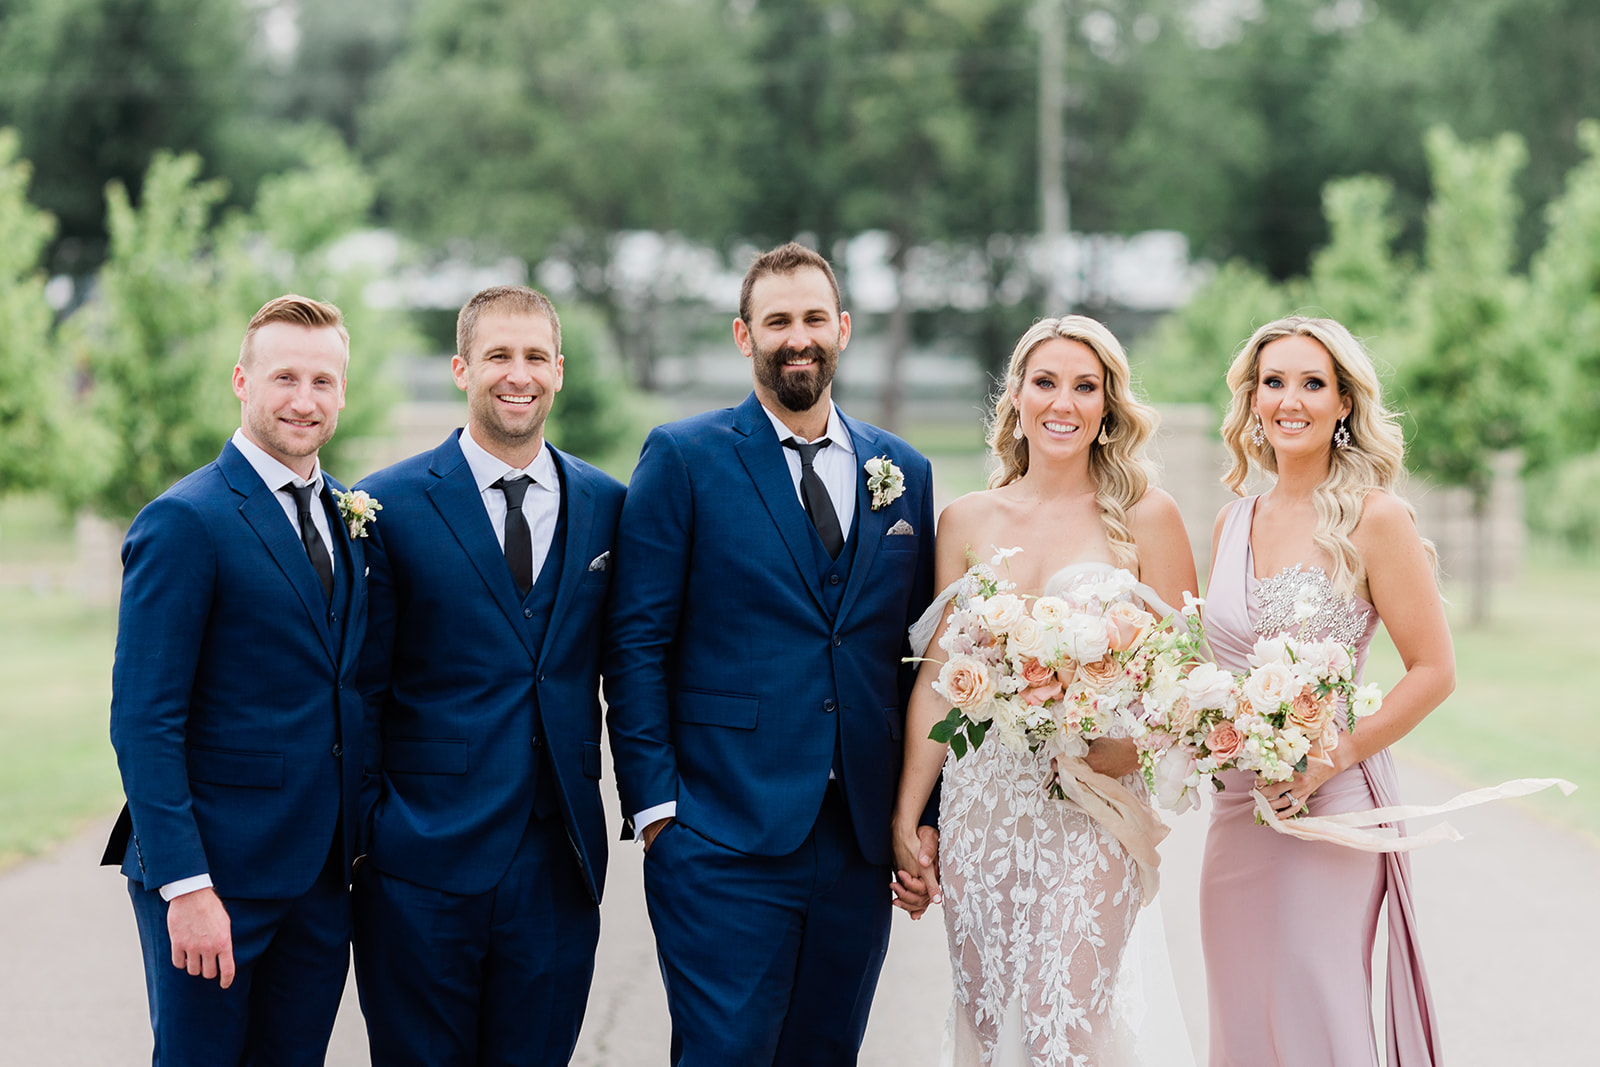 wedding party portrait at farm to table wedding by jess collins photography